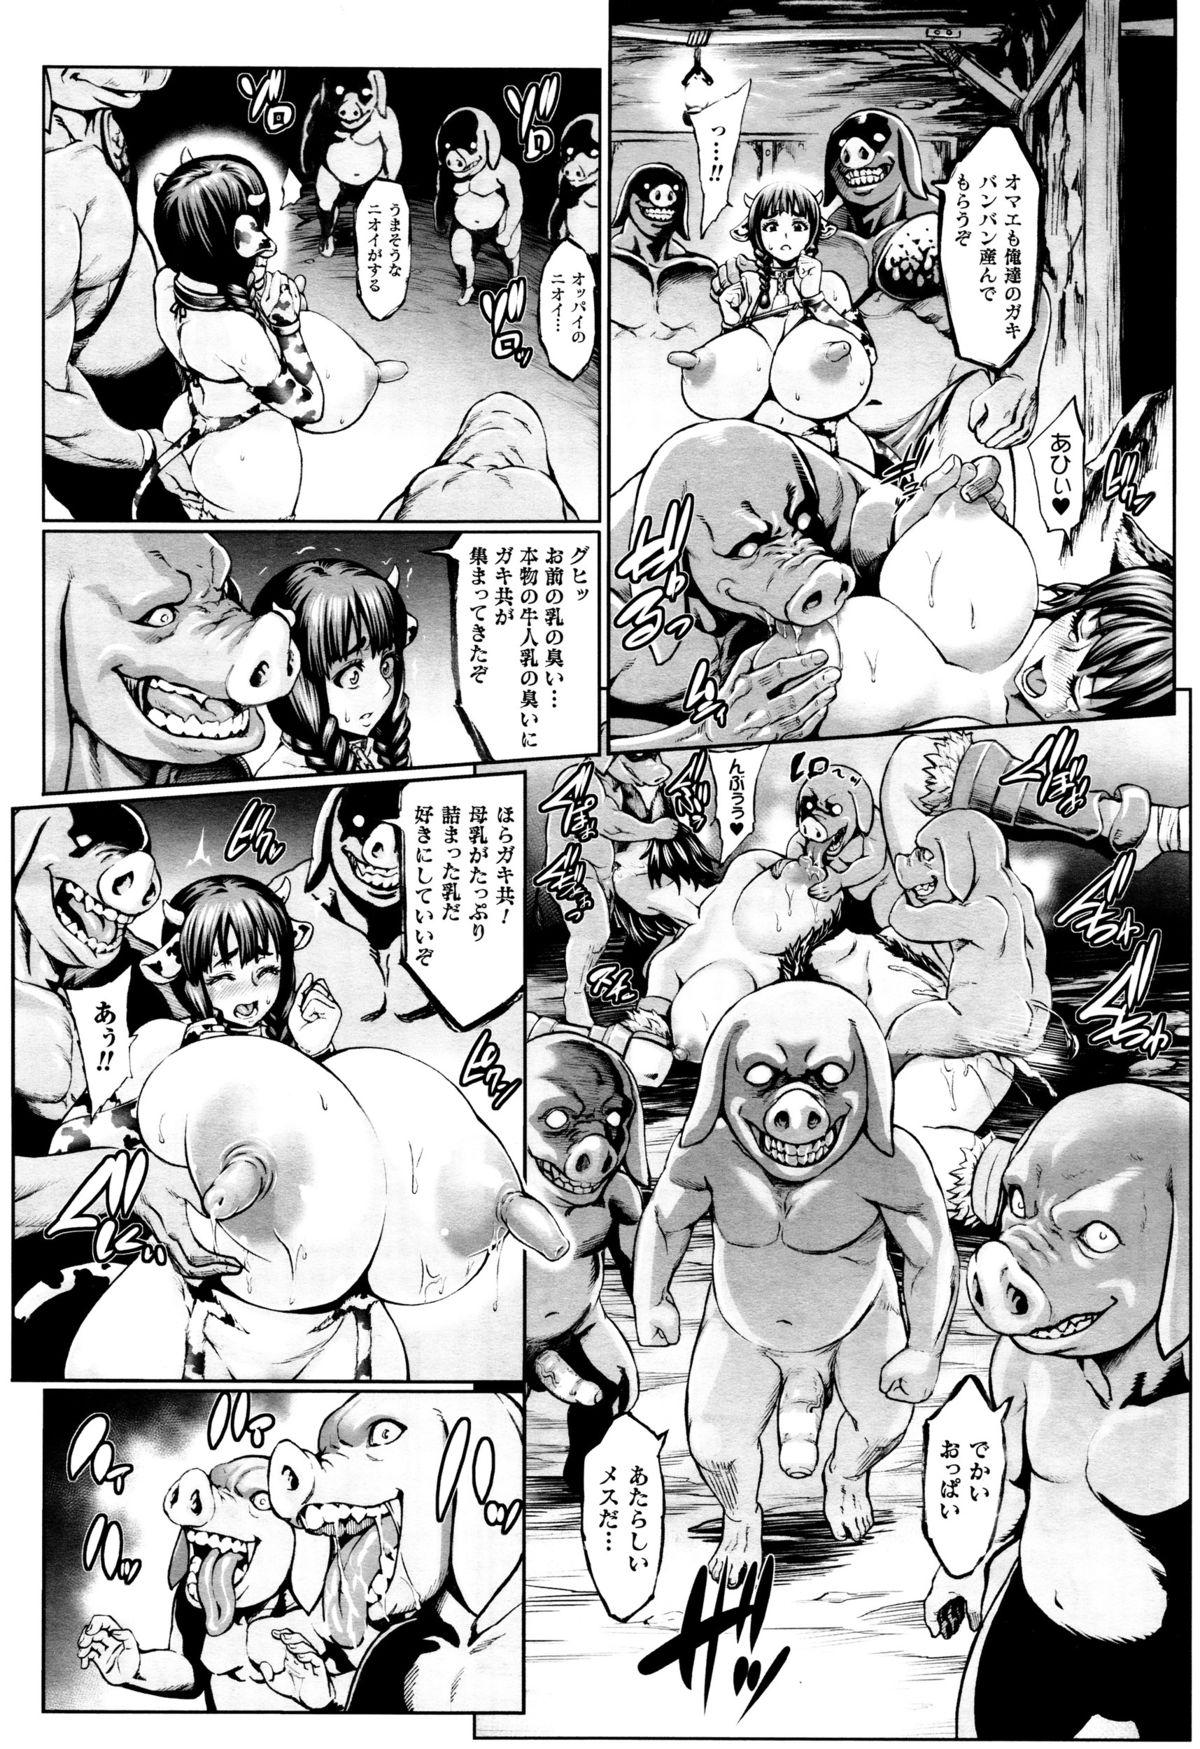 Glamour 醜悪な豚亜人に囚われた牛娘を繁殖牧場で輪姦陵辱！ Fat Ass - Page 6